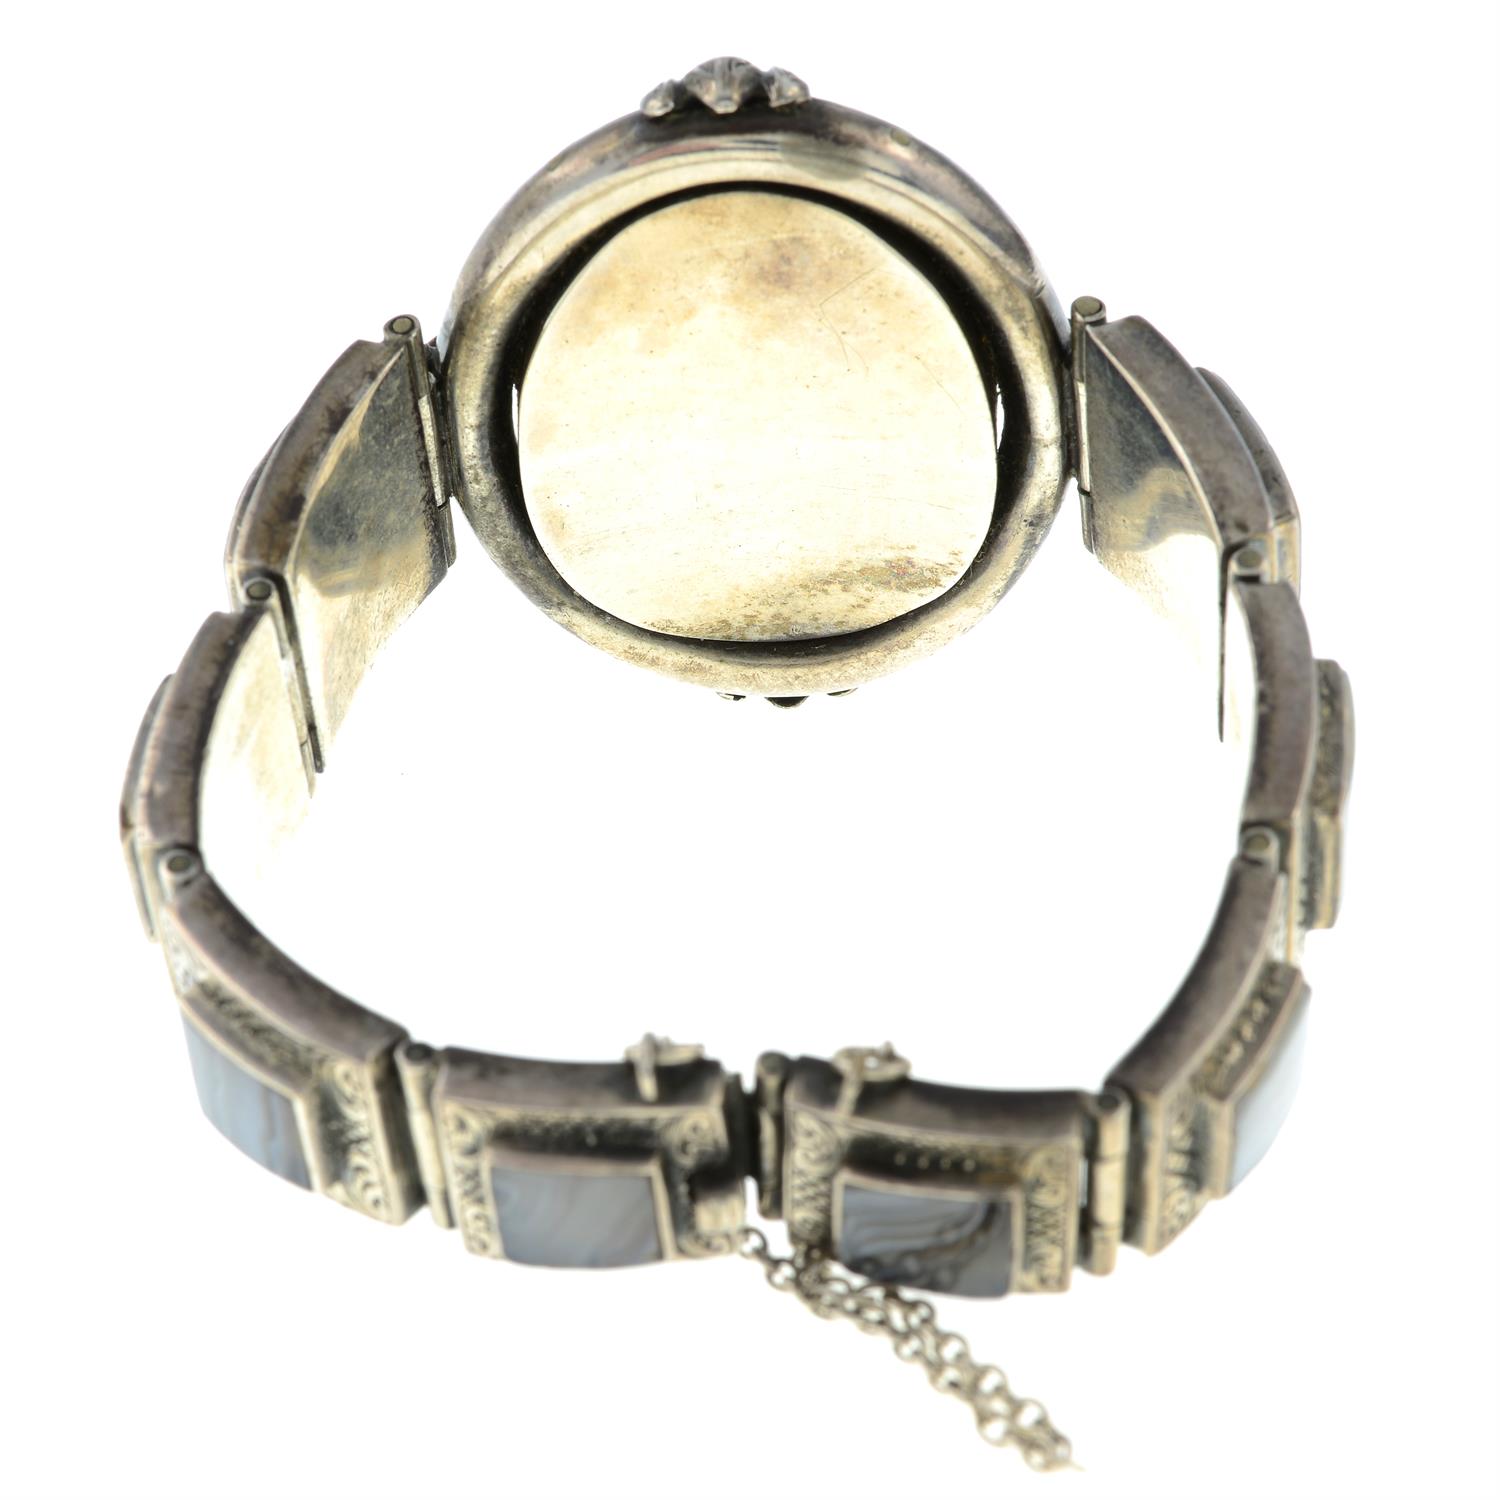 A Victorian silver agate bracelet. - Image 2 of 2